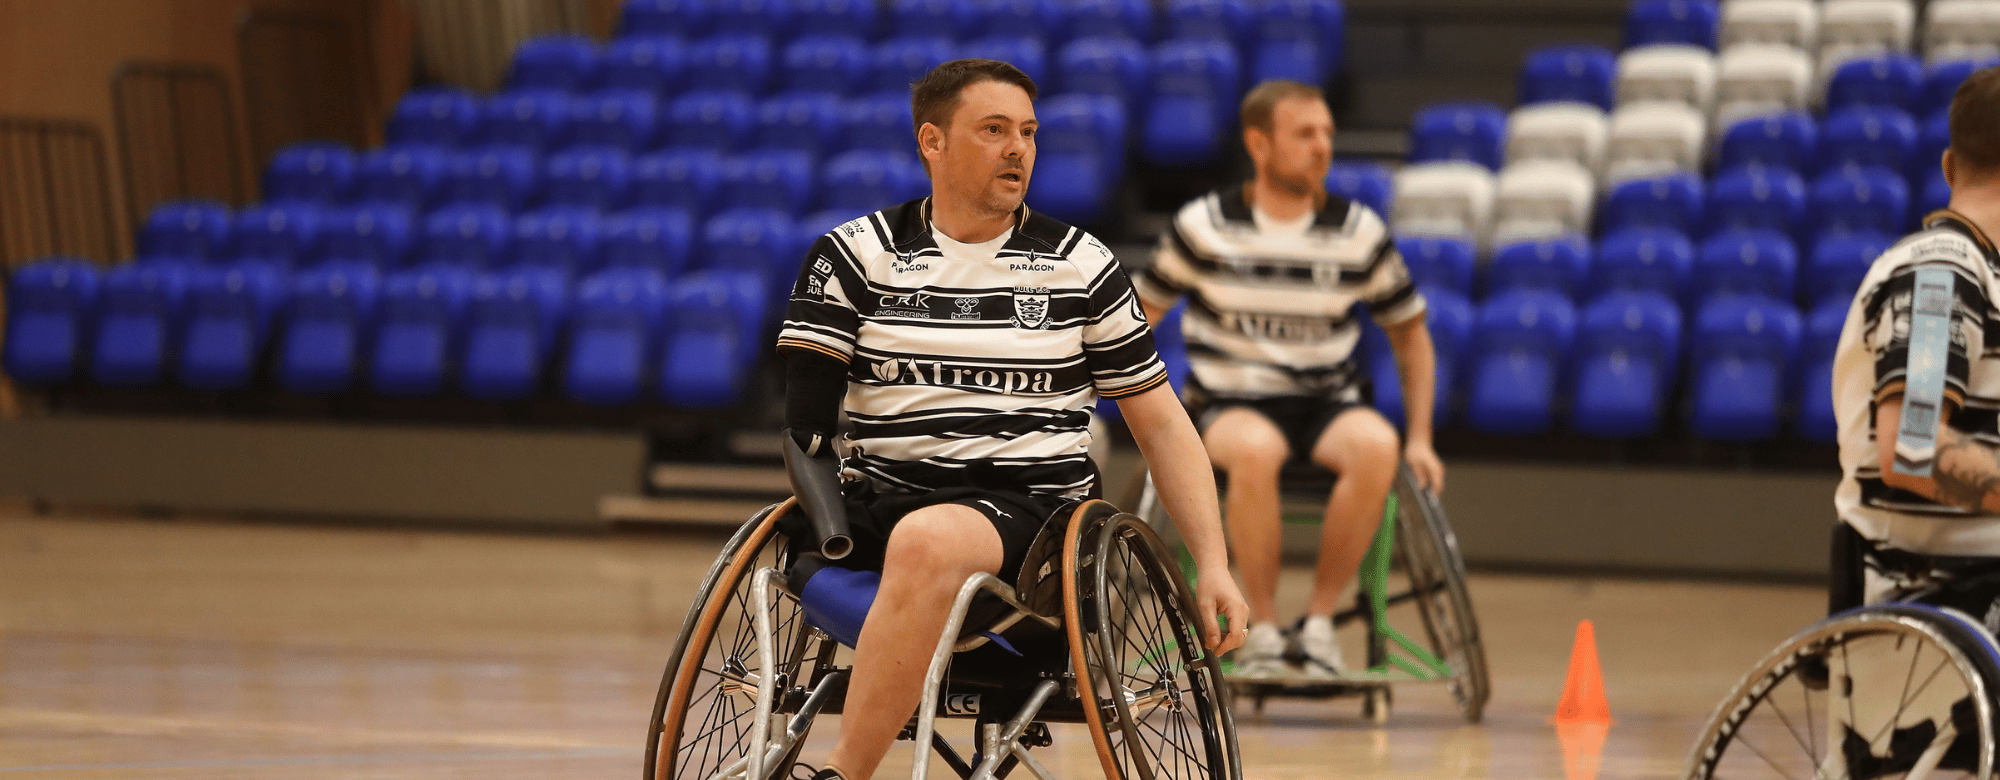 Wheelchair Challenge Cup Quarter-Final This Saturday